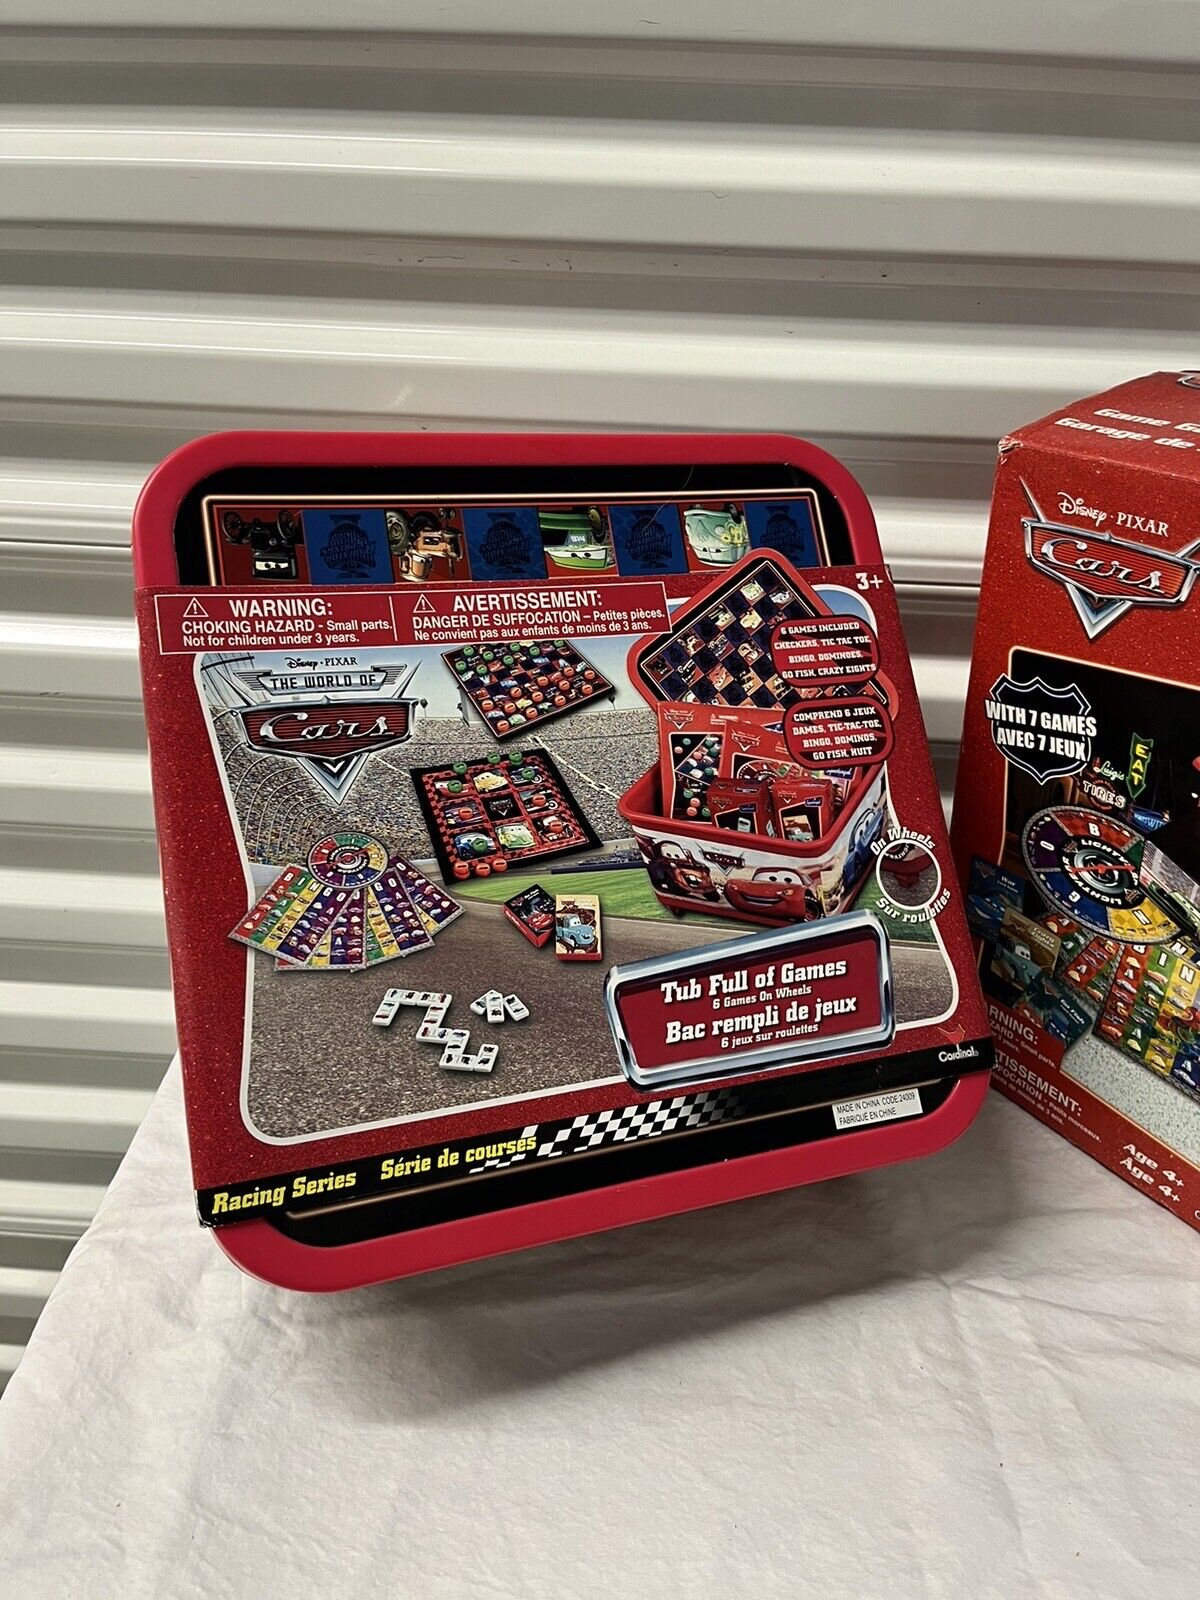 Disney Pixar Cars Supercharged 7 Games Wooden Game Garage by Cardinal Lot Of 2